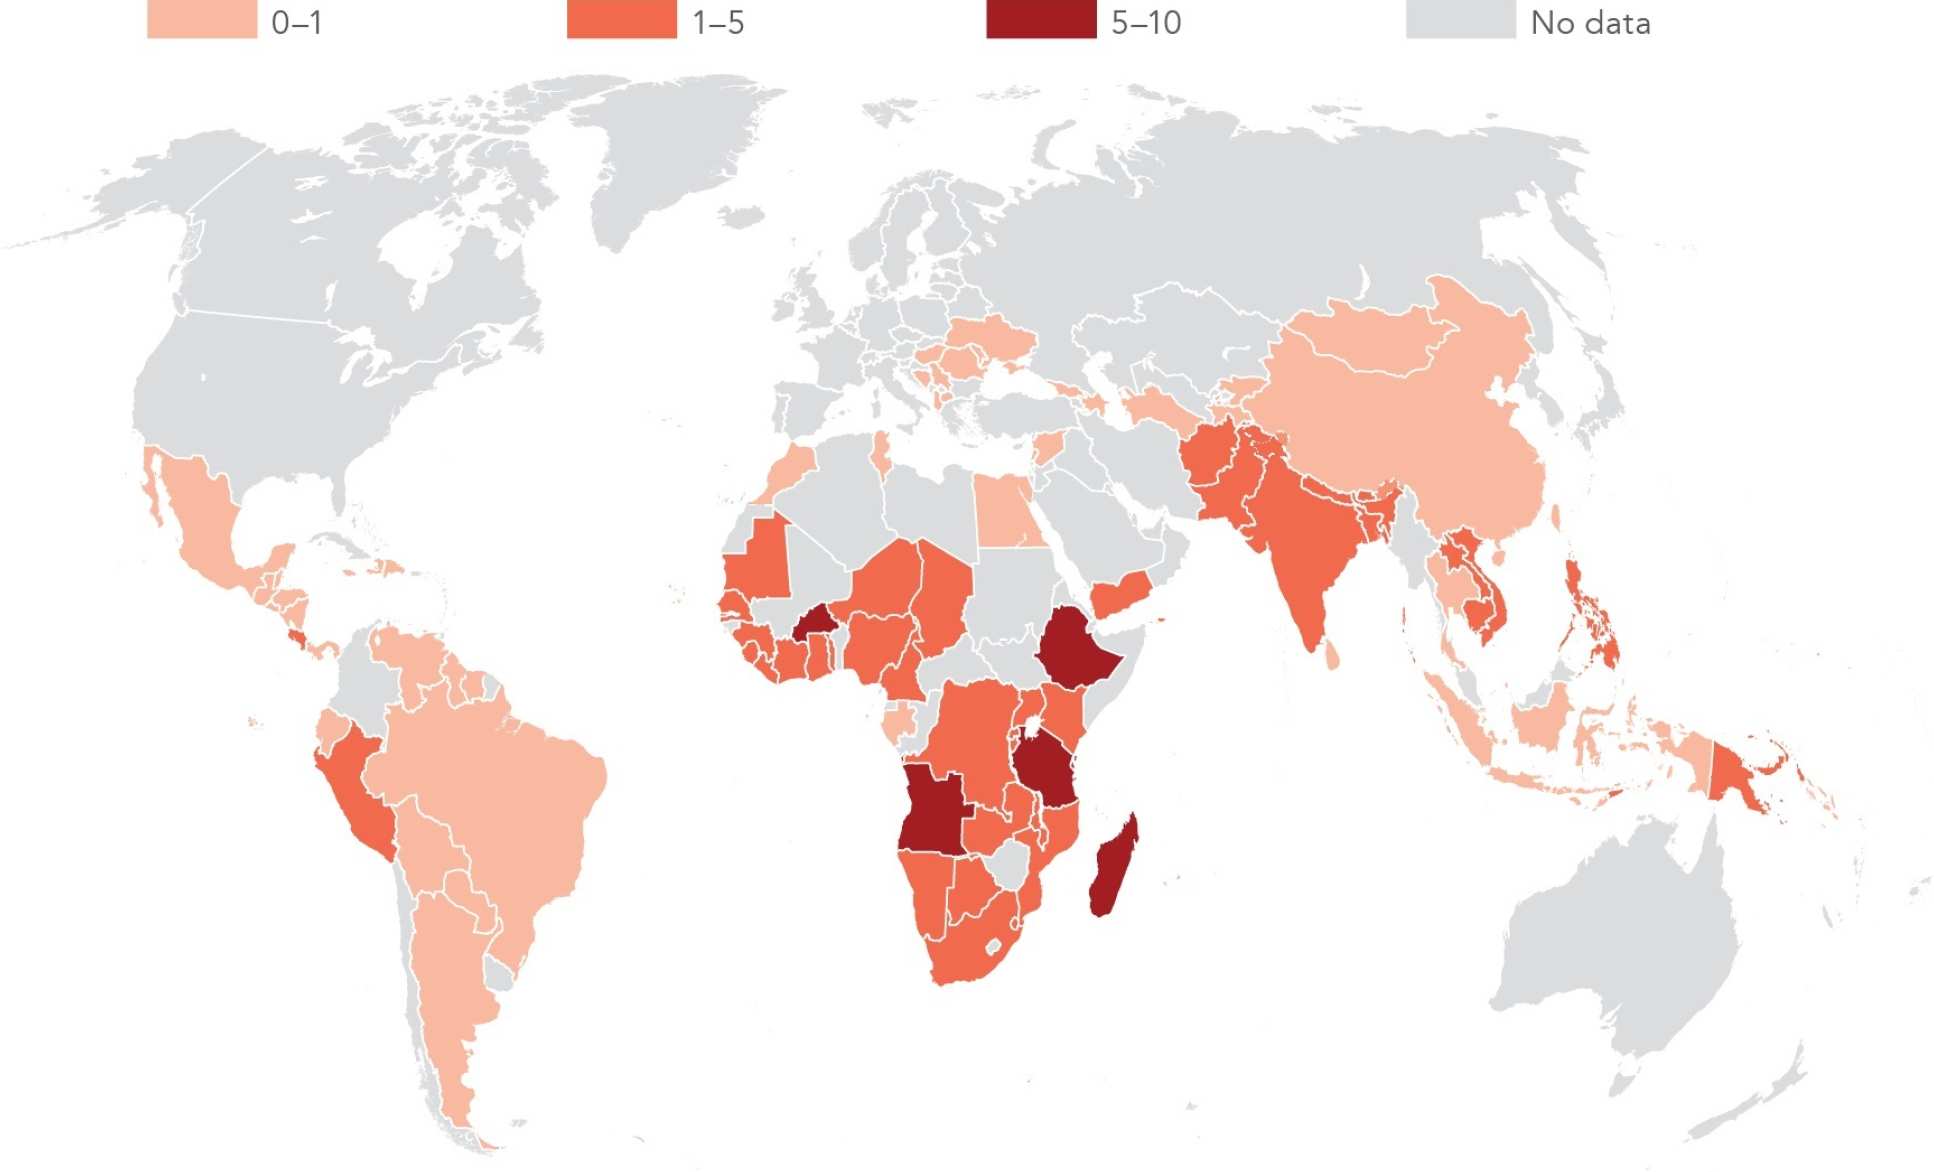 Map showing the projected increase in number of people living in extreme poverty due to climate change by 2030